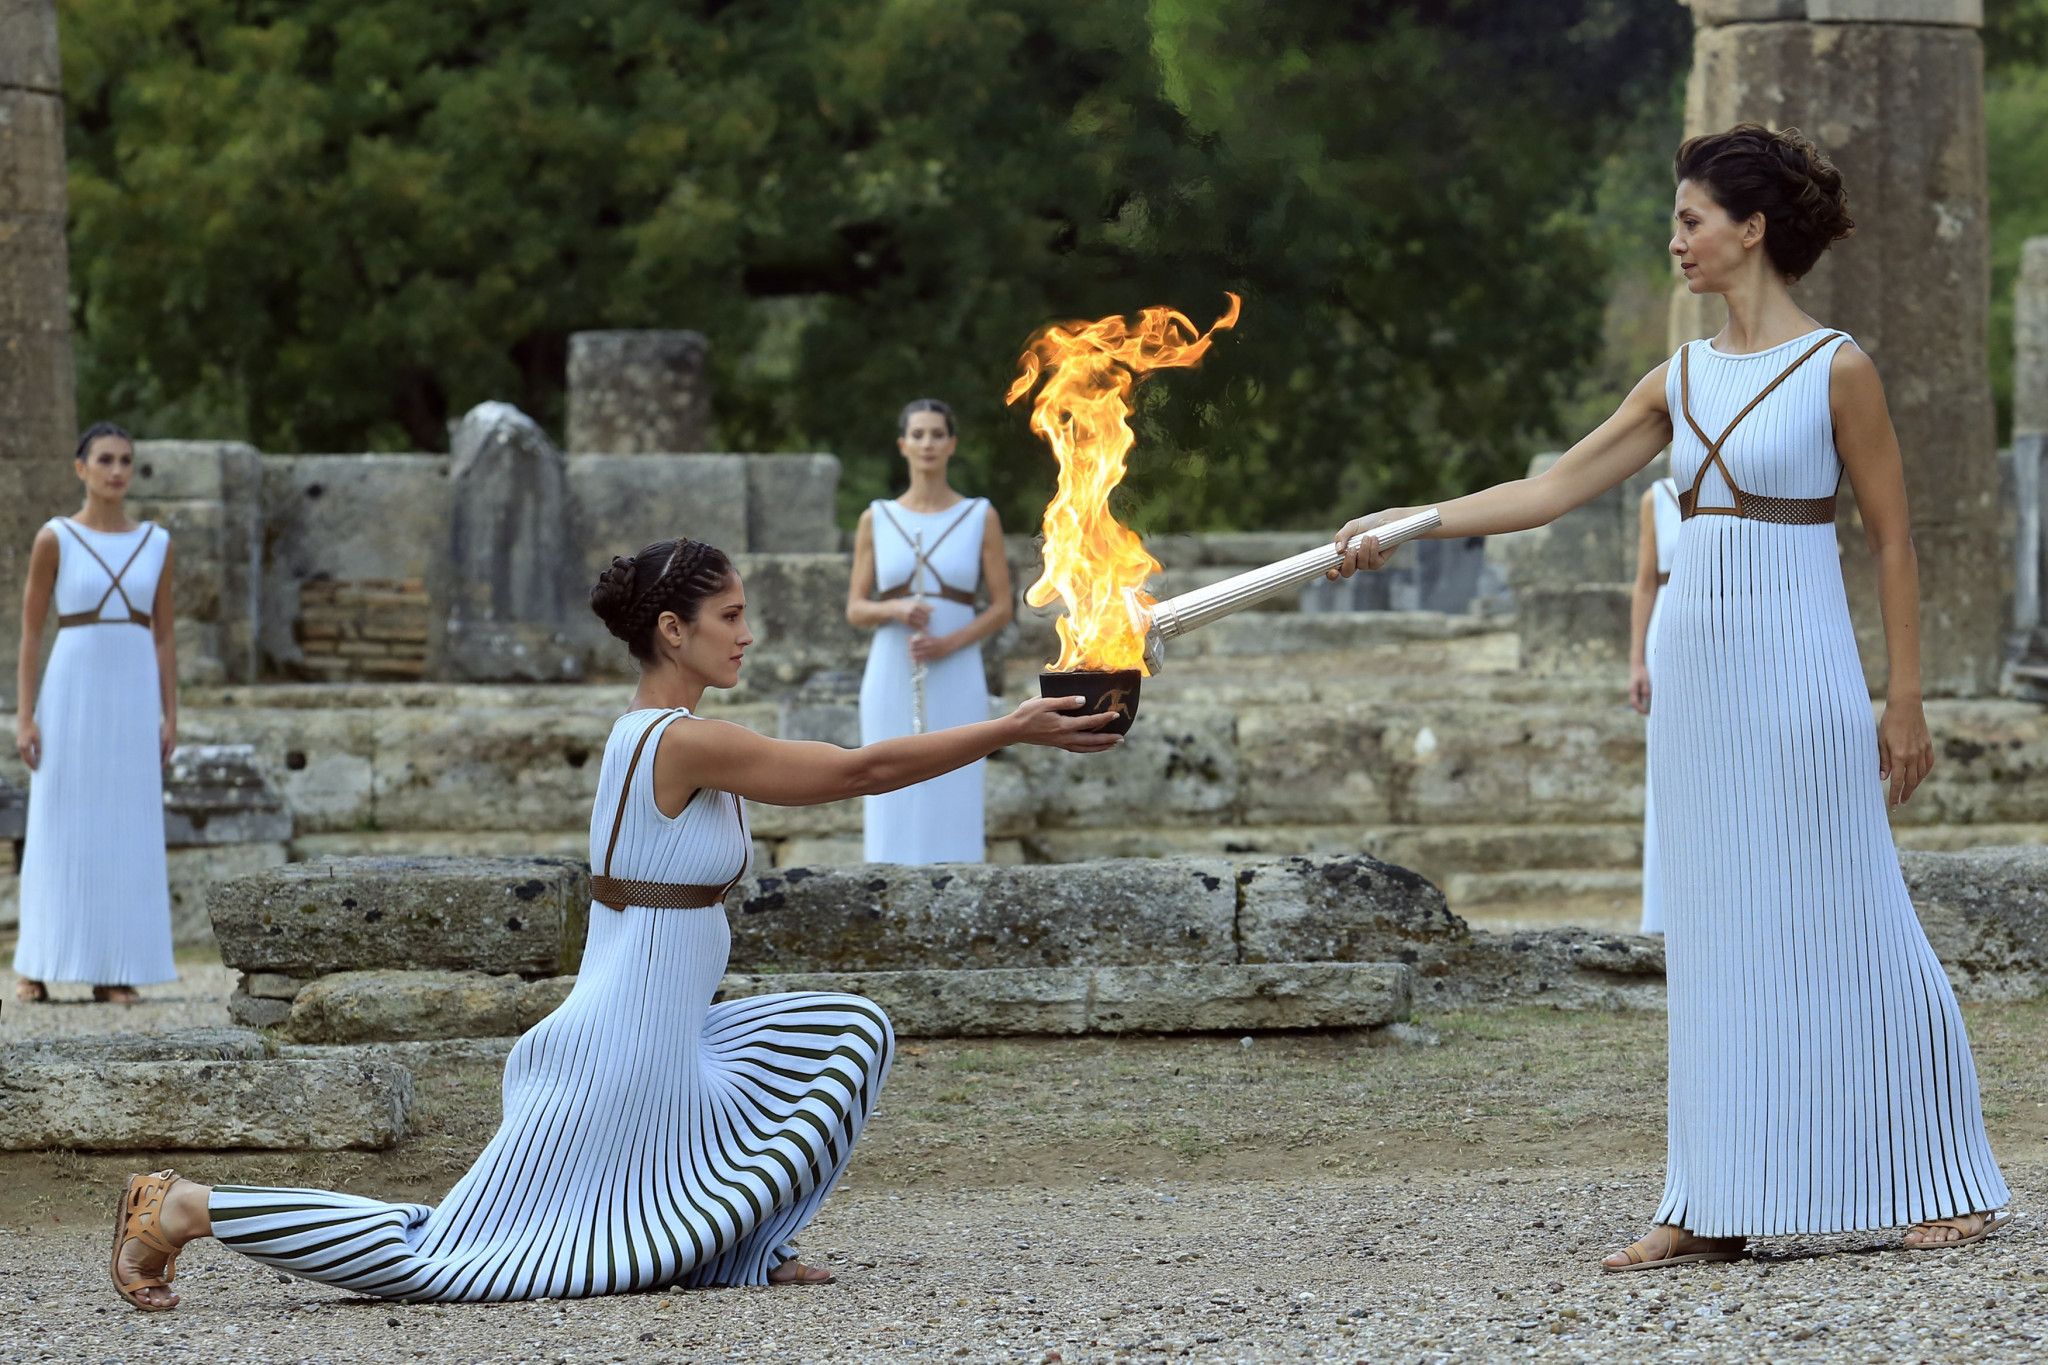 The high priestess passes the flame at the Temple of Hera ©Getty Images